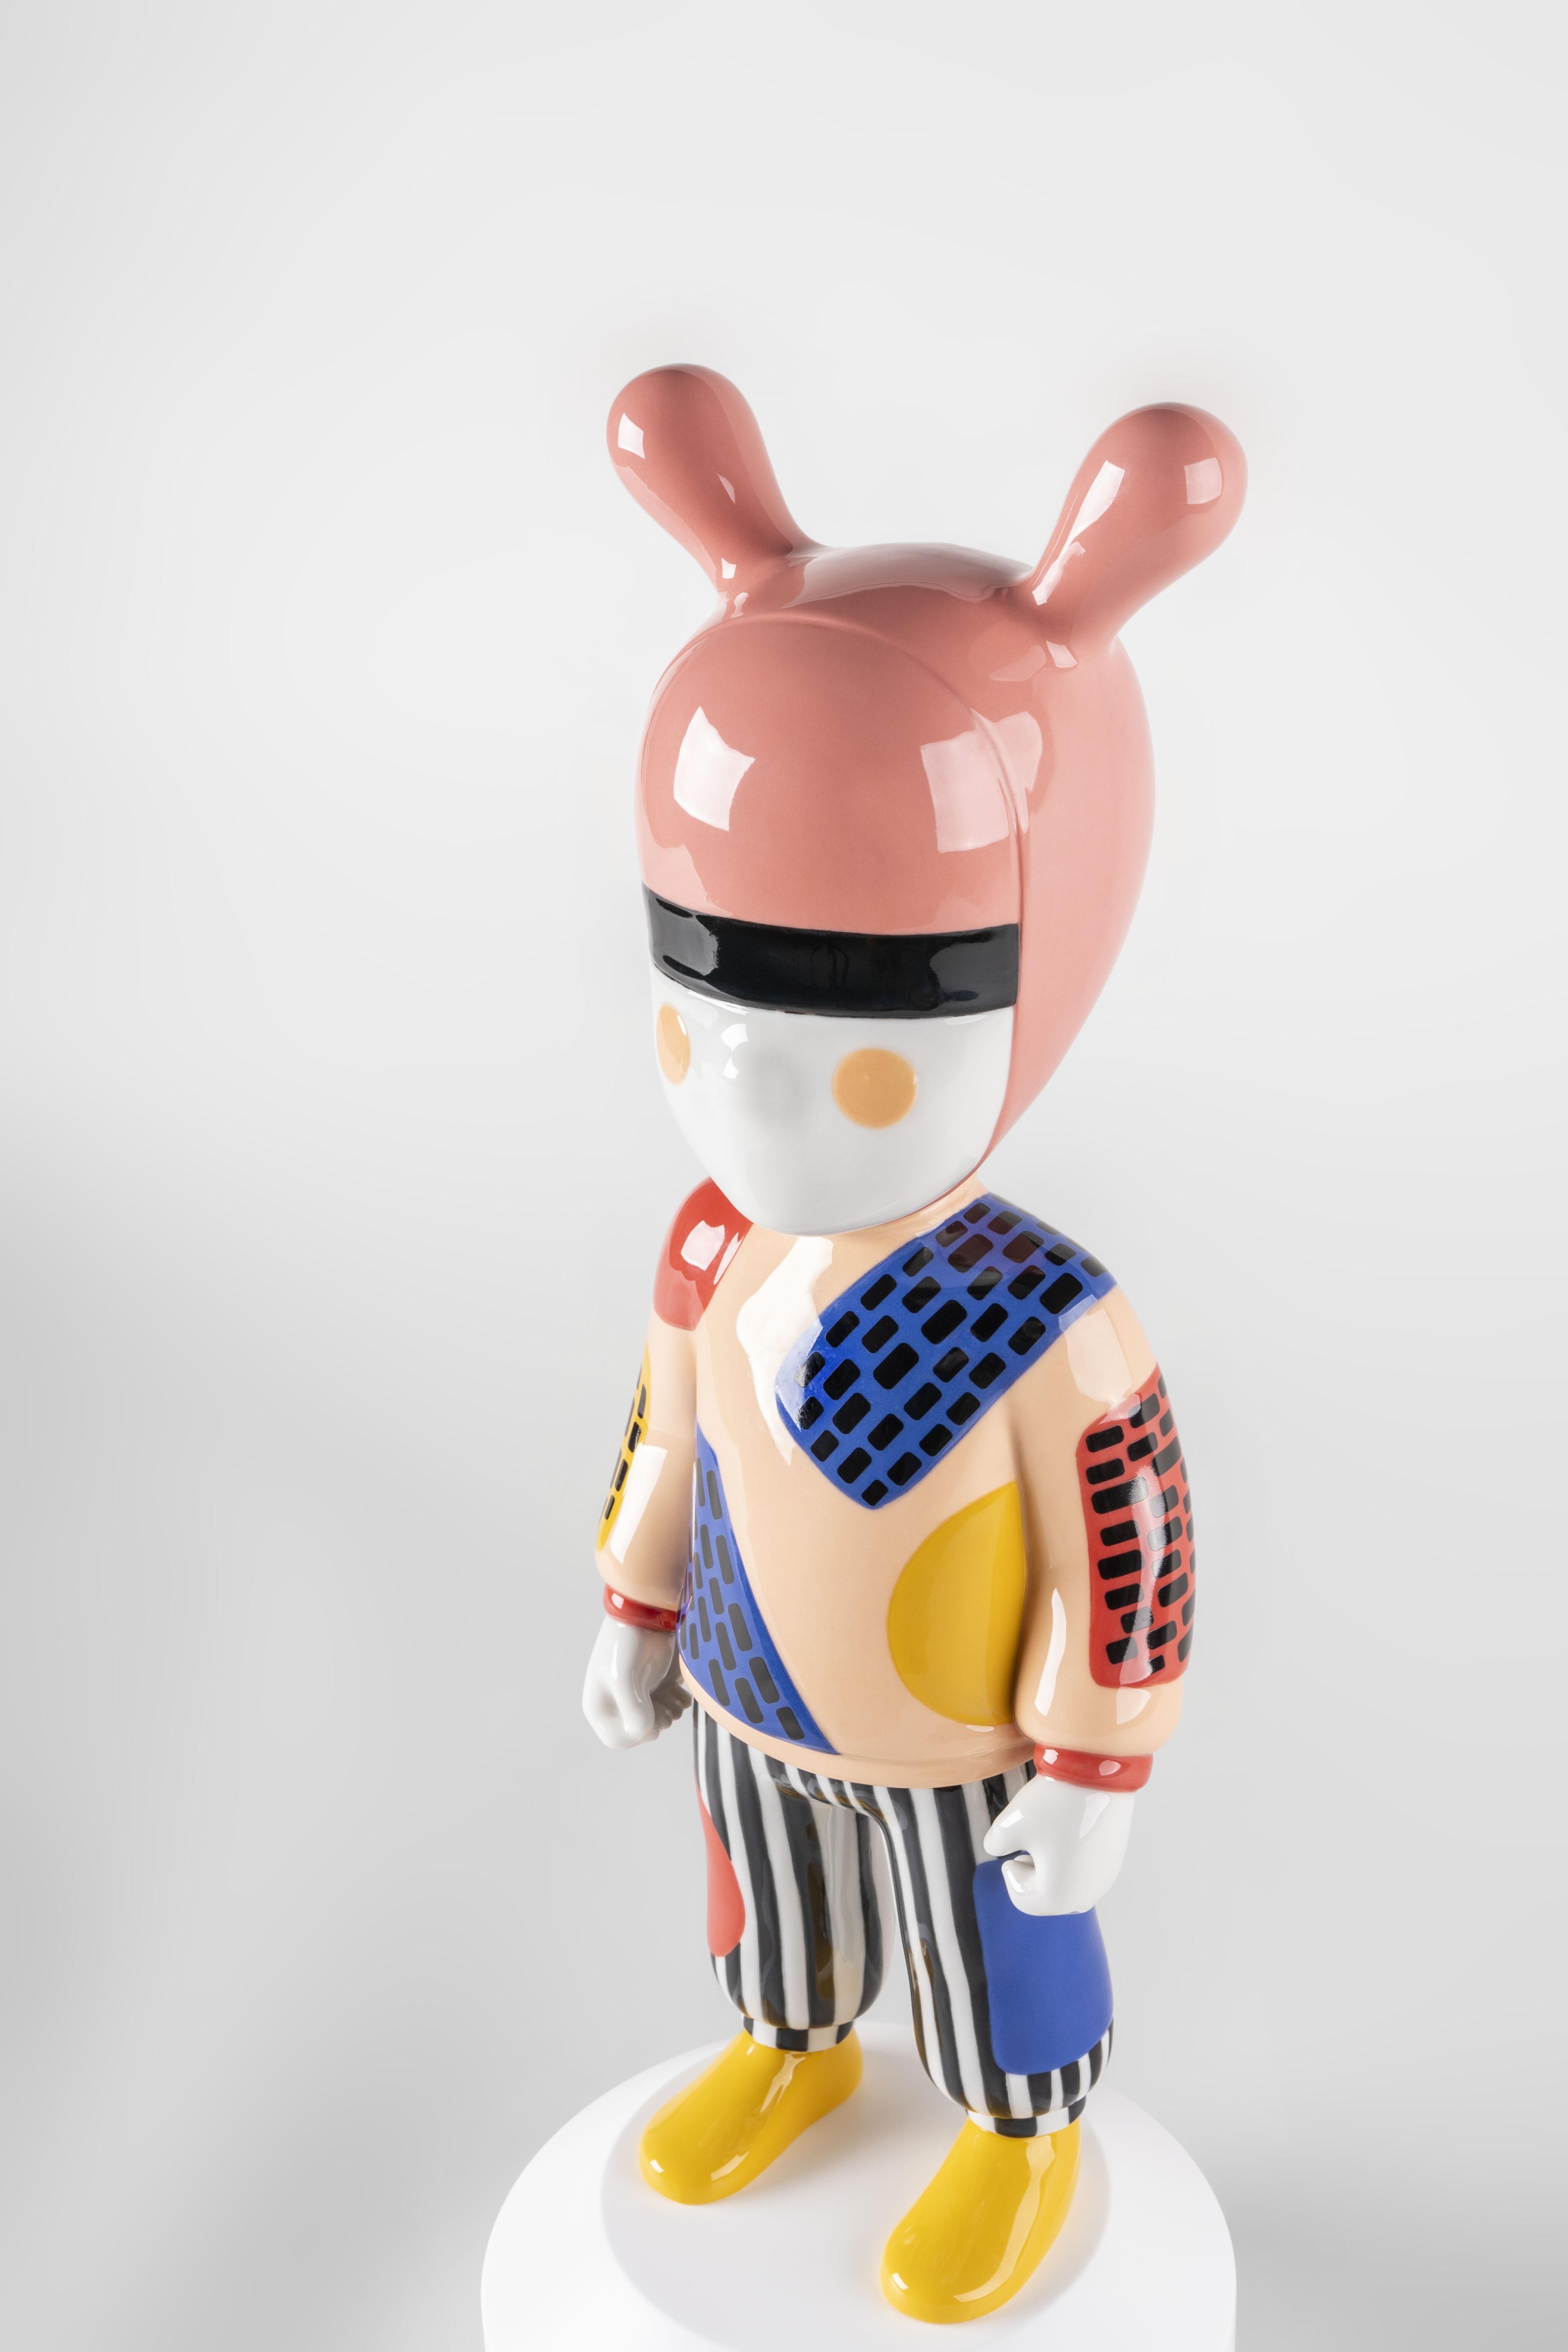 Porcelain sculpture created by the French artist Camille Walala for The Guest collection. This large version of The Guest is signed by Camille Walala, a London-based multidisciplinary French designer. Walala is known for her vibrant distinctive work